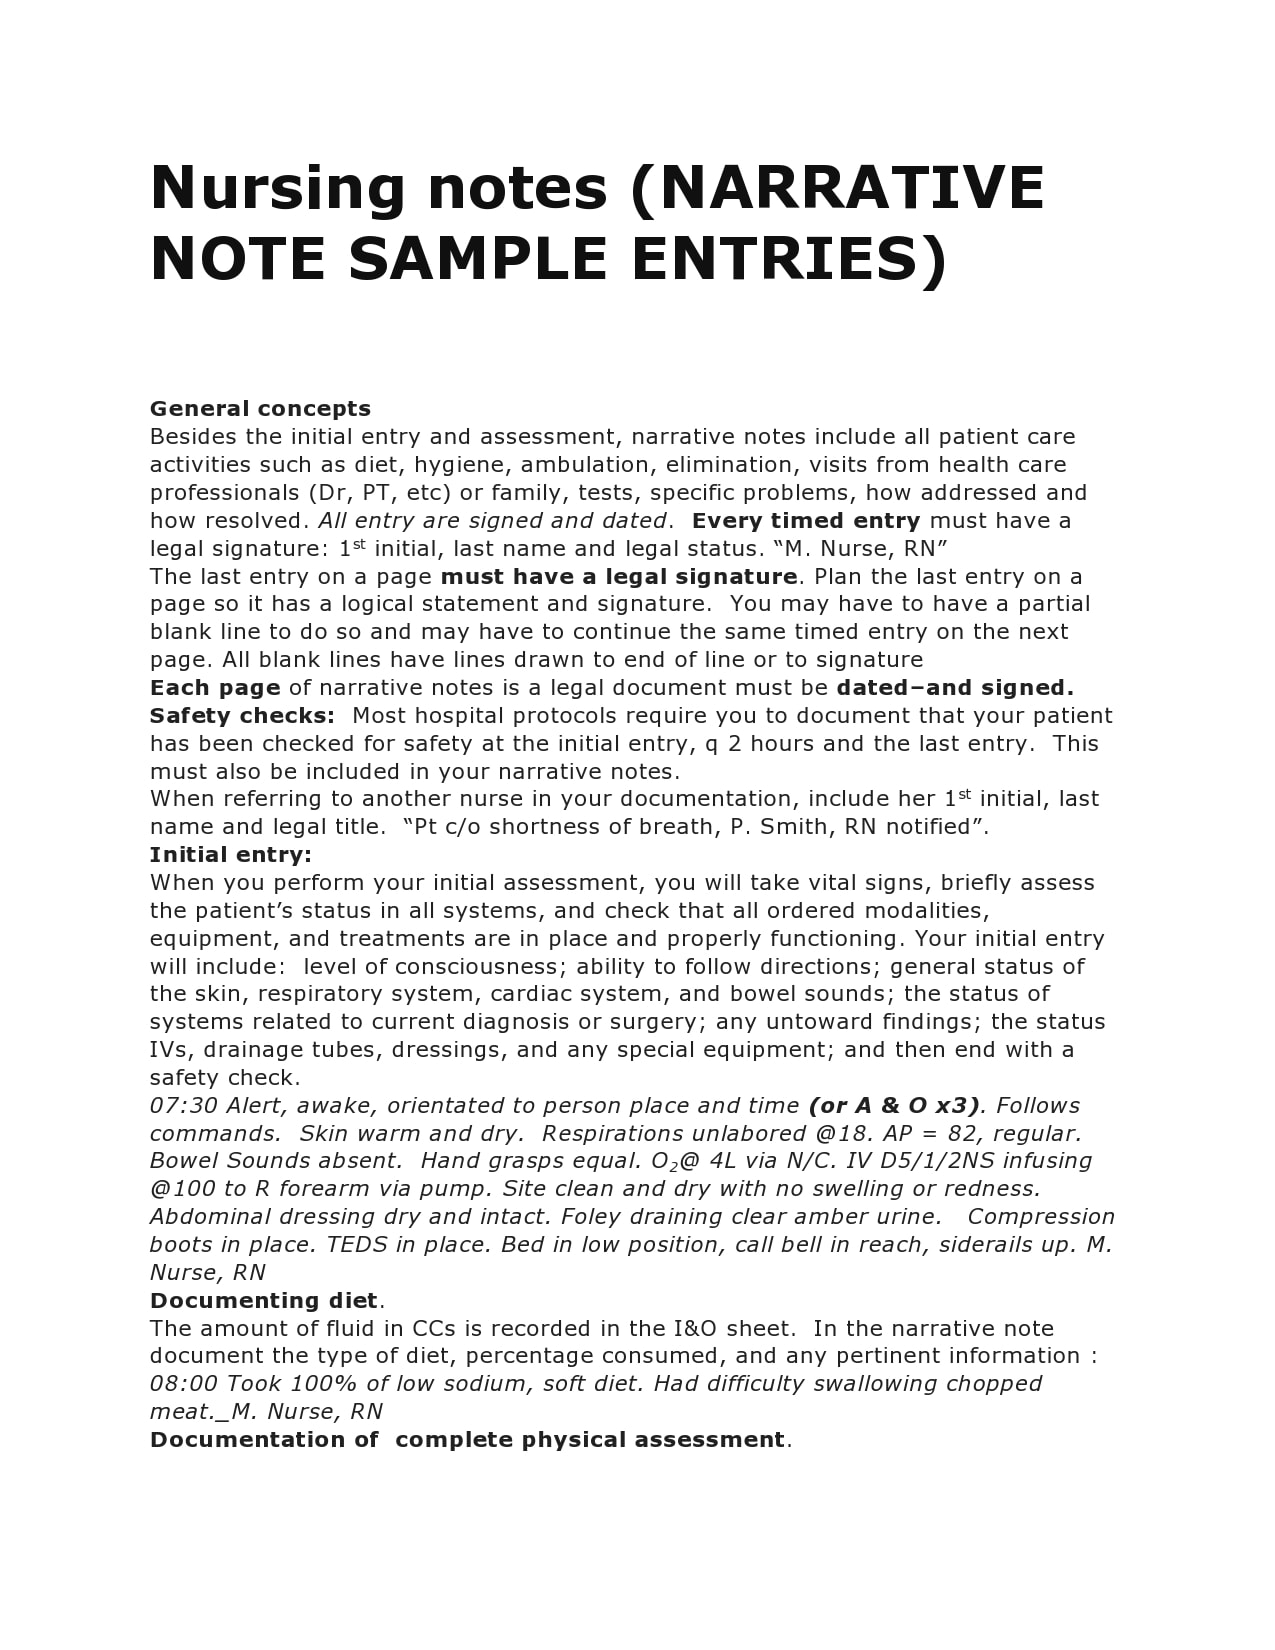 29 Useful Nursing Note Samples (+Templates) - TemplateArchive